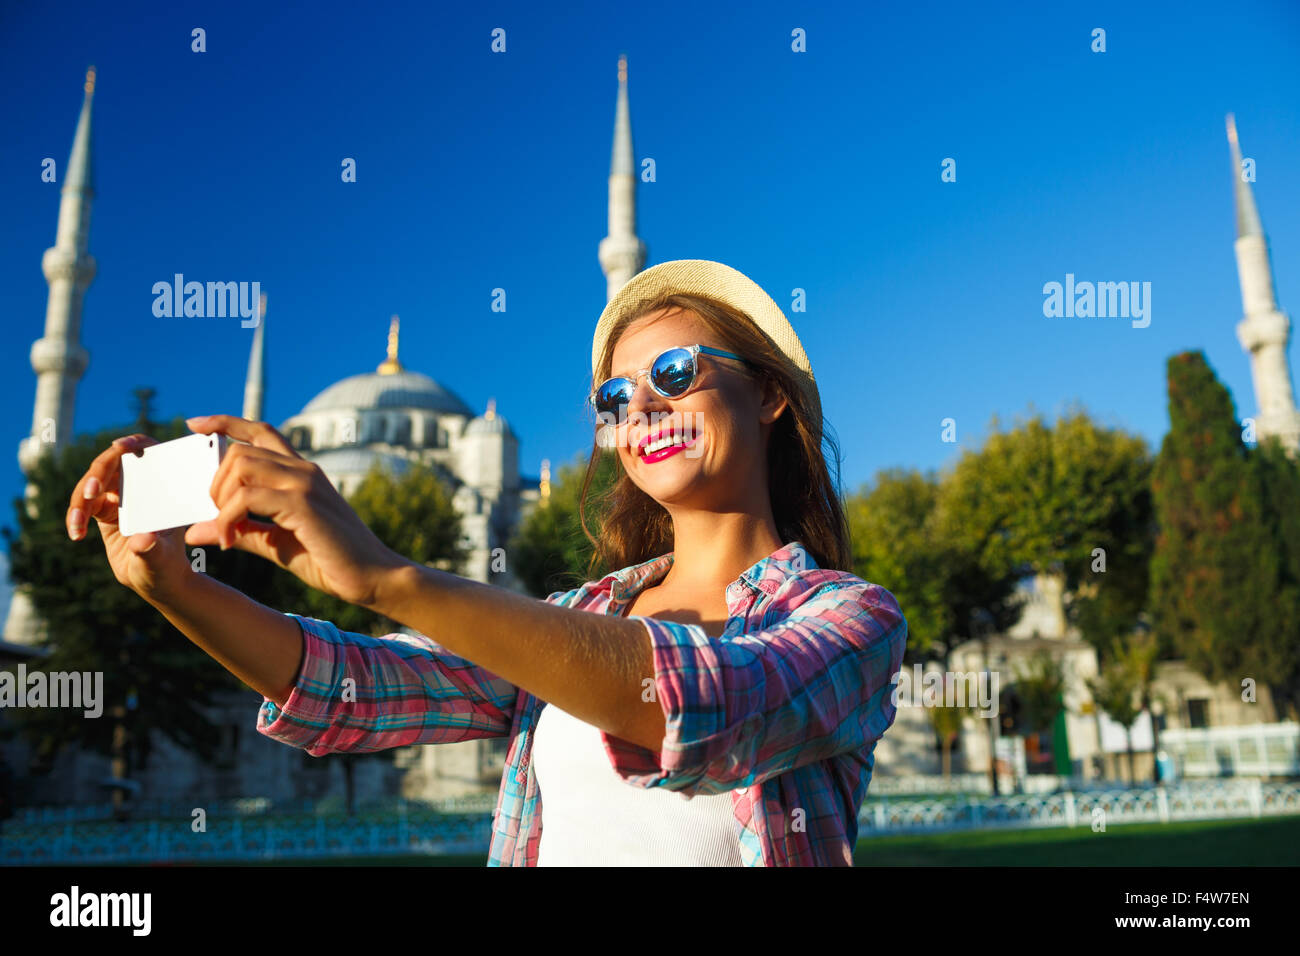 Girl In The Hat Making Selfie By The Smartphone On The Background Of 